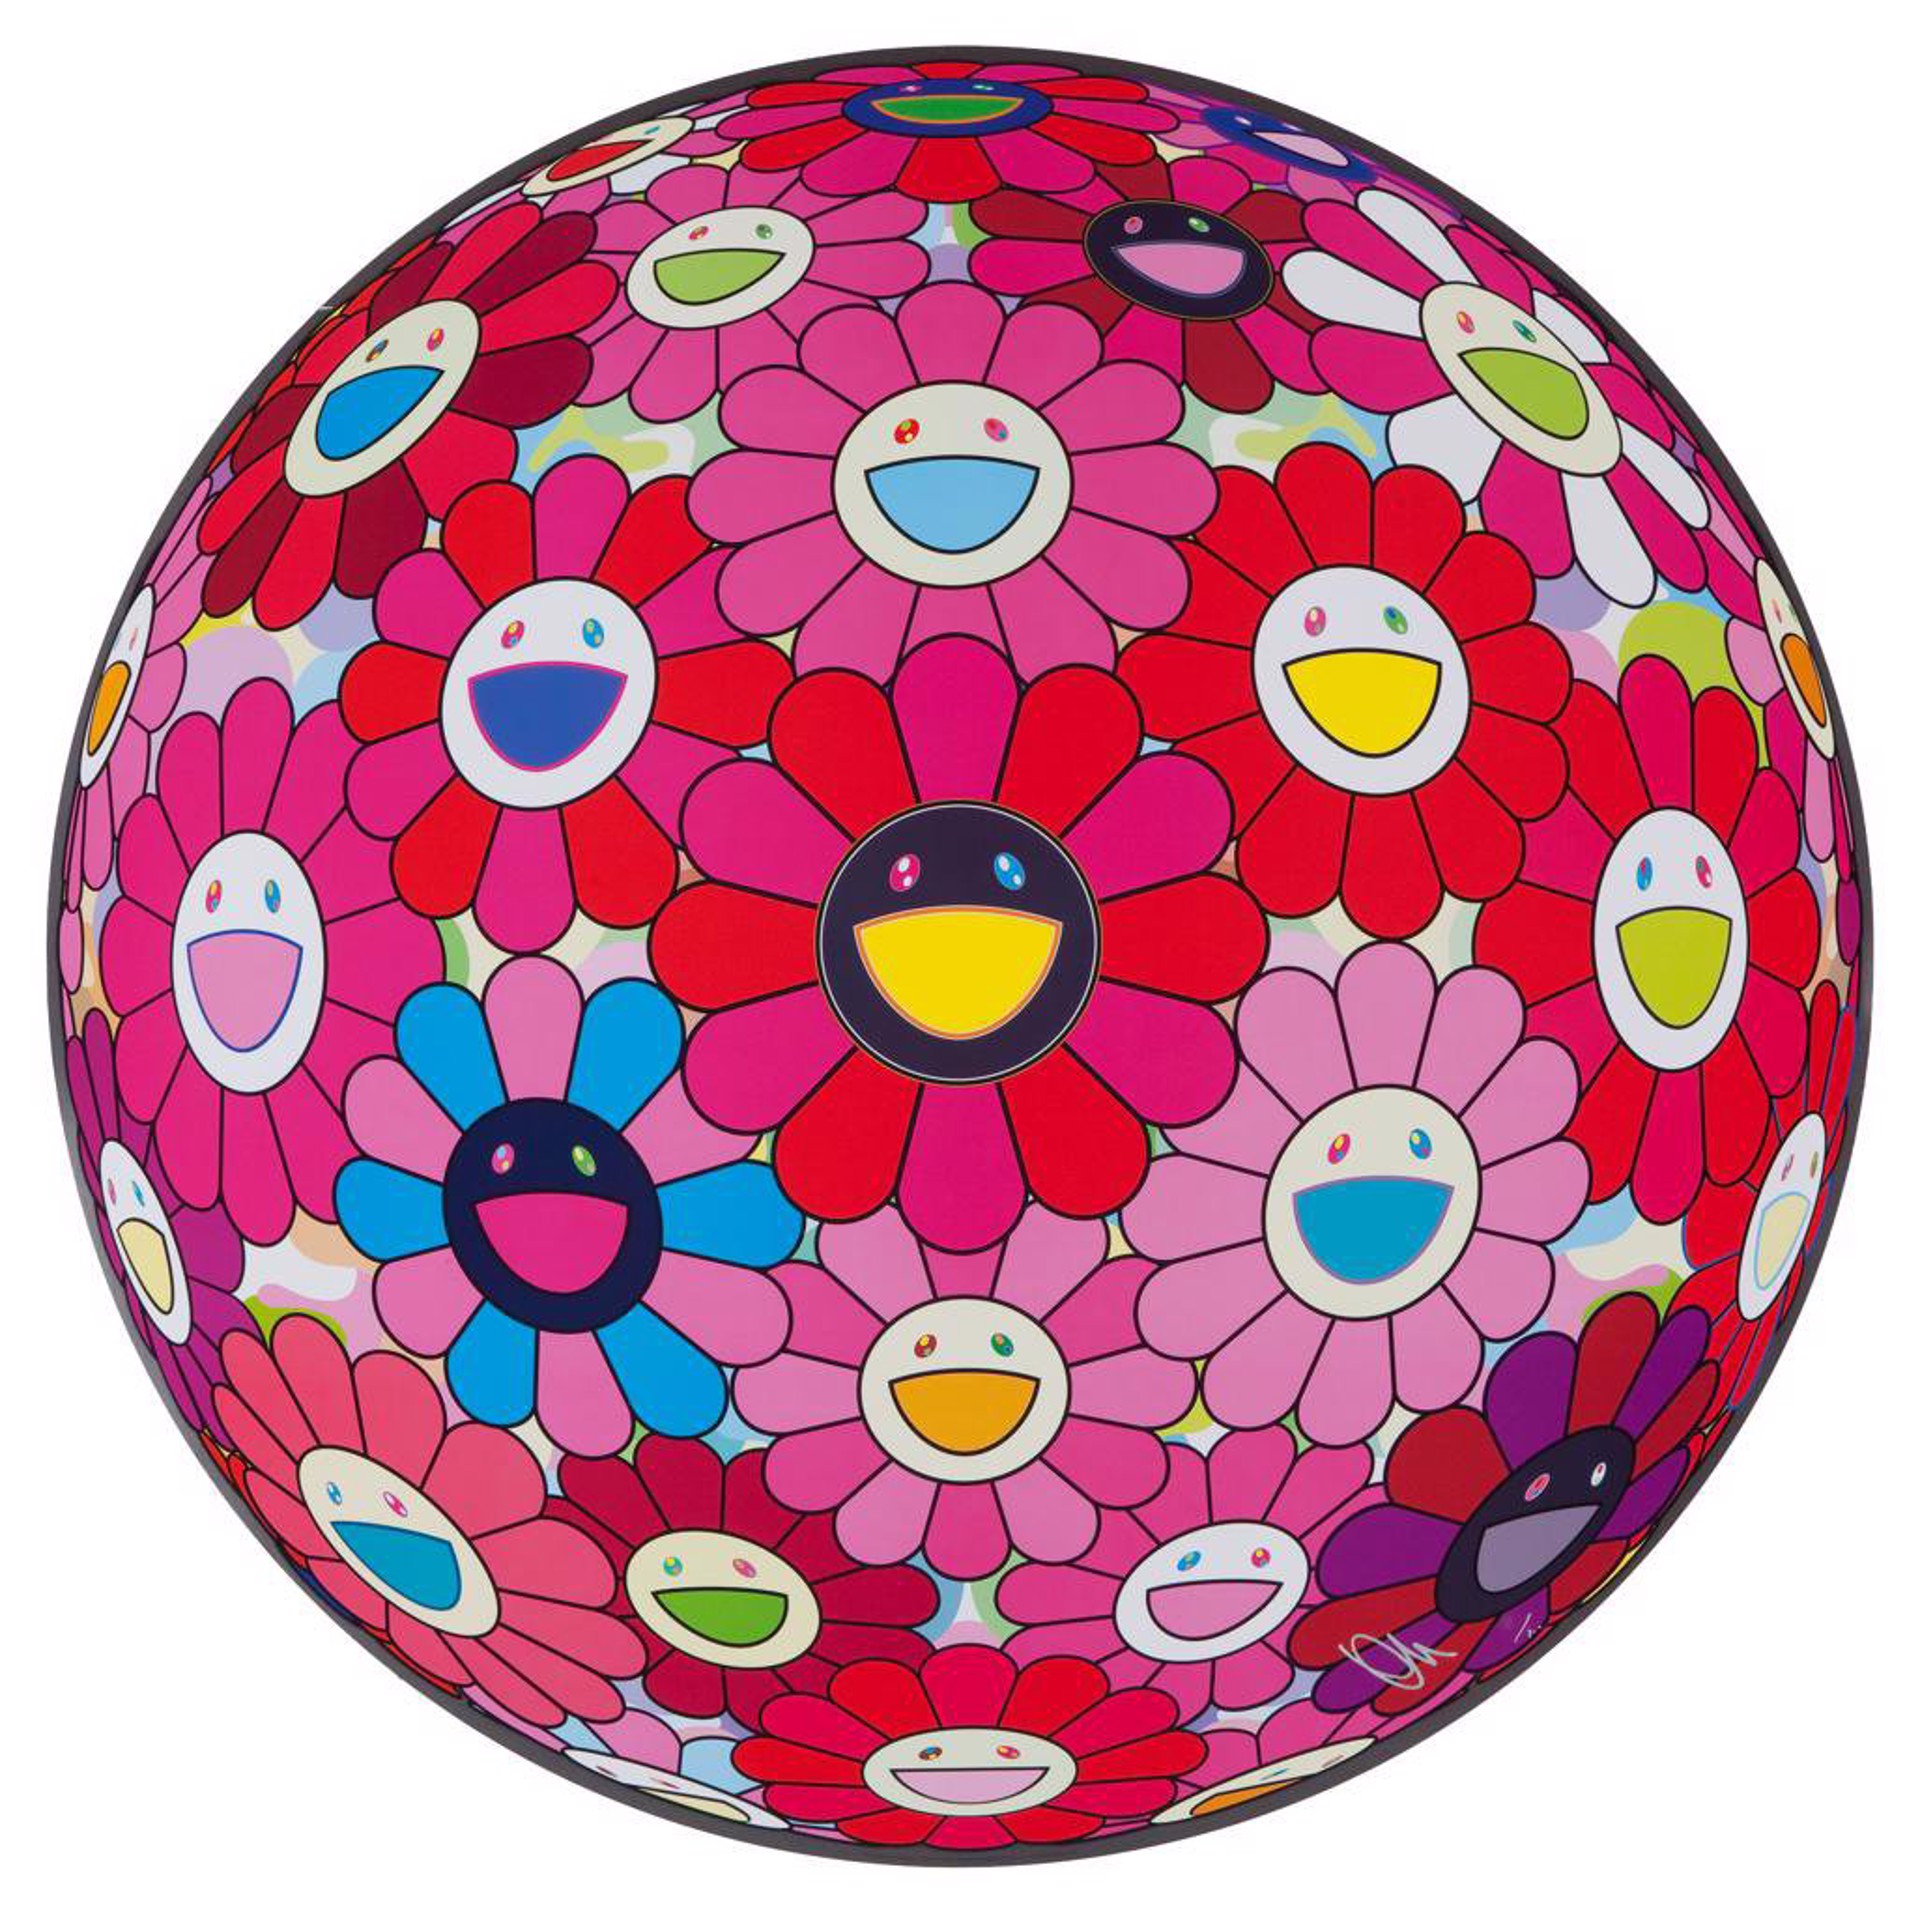 Thoughts on Picasso by Takashi Murakami